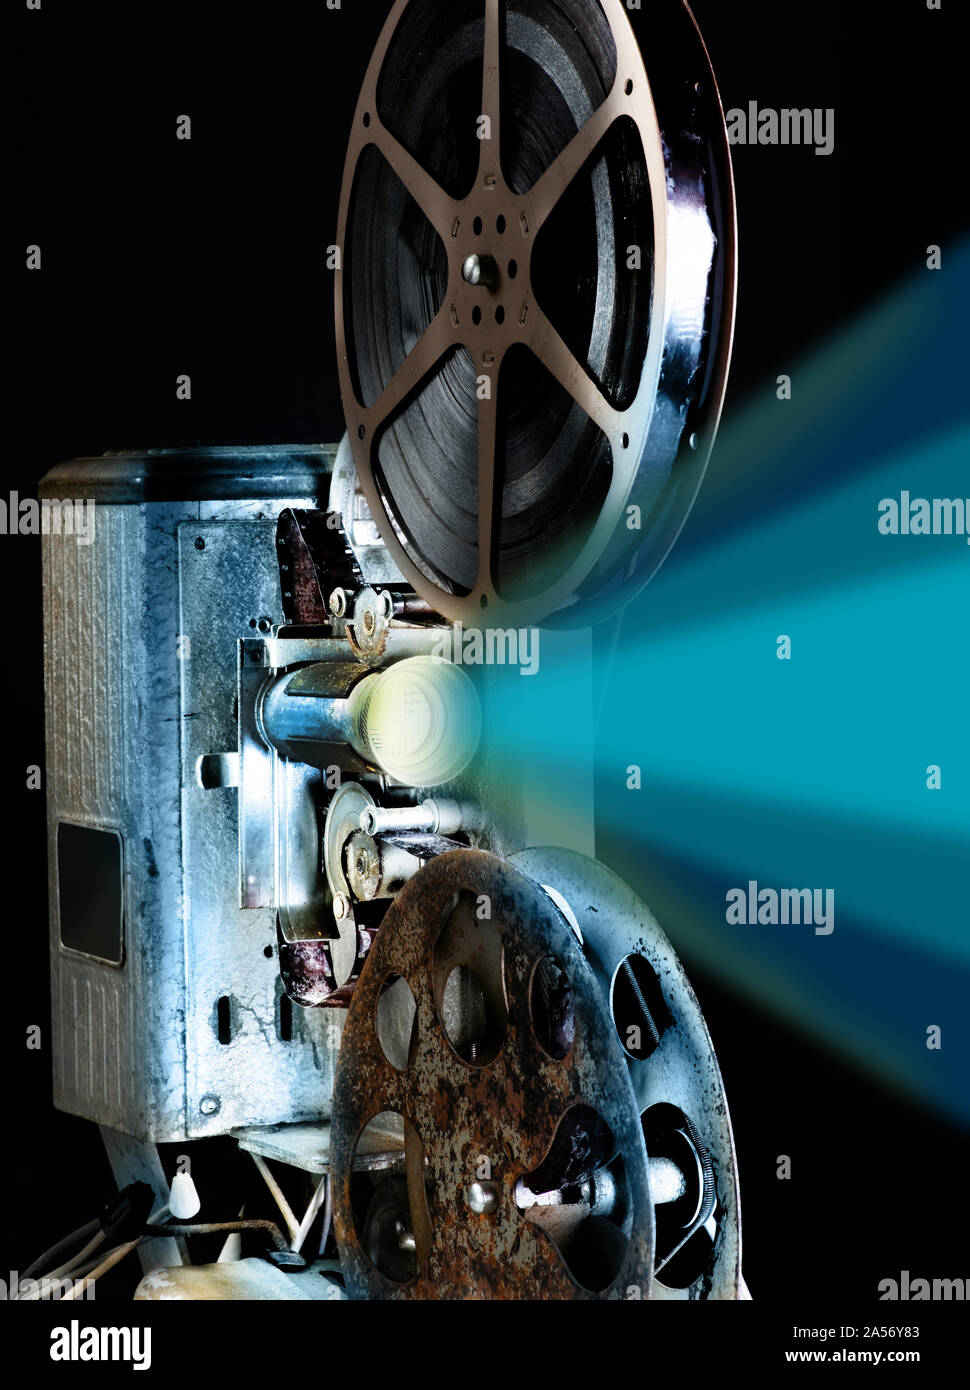 16mm film projector from the 1940's Stock Photo - Alamy